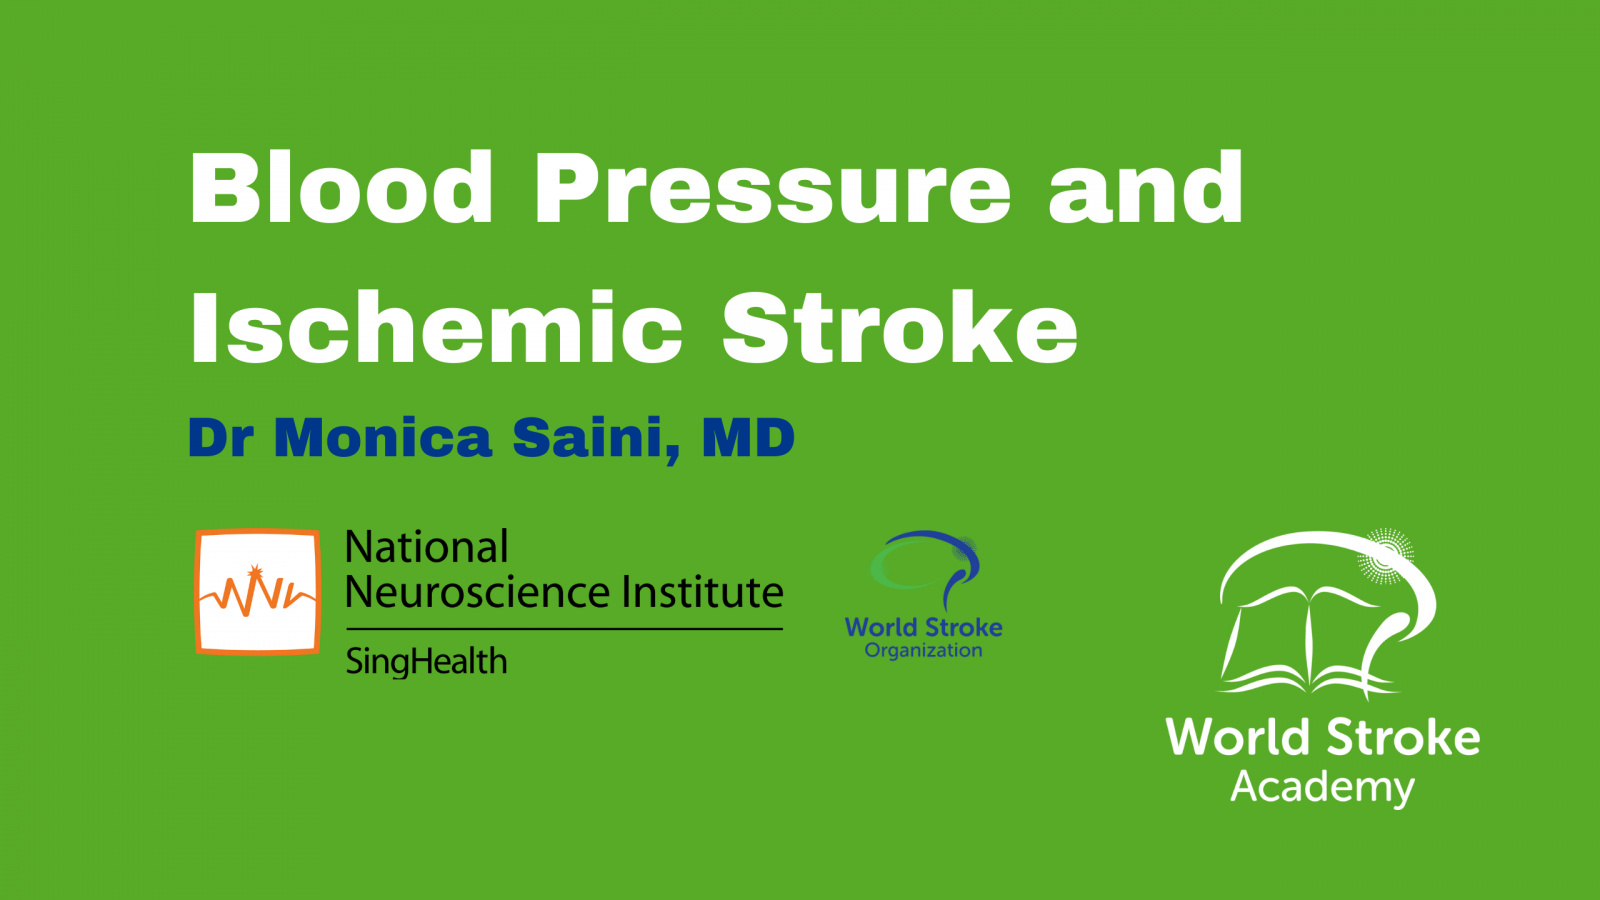 Blood Pressure and Ischemic Stroke